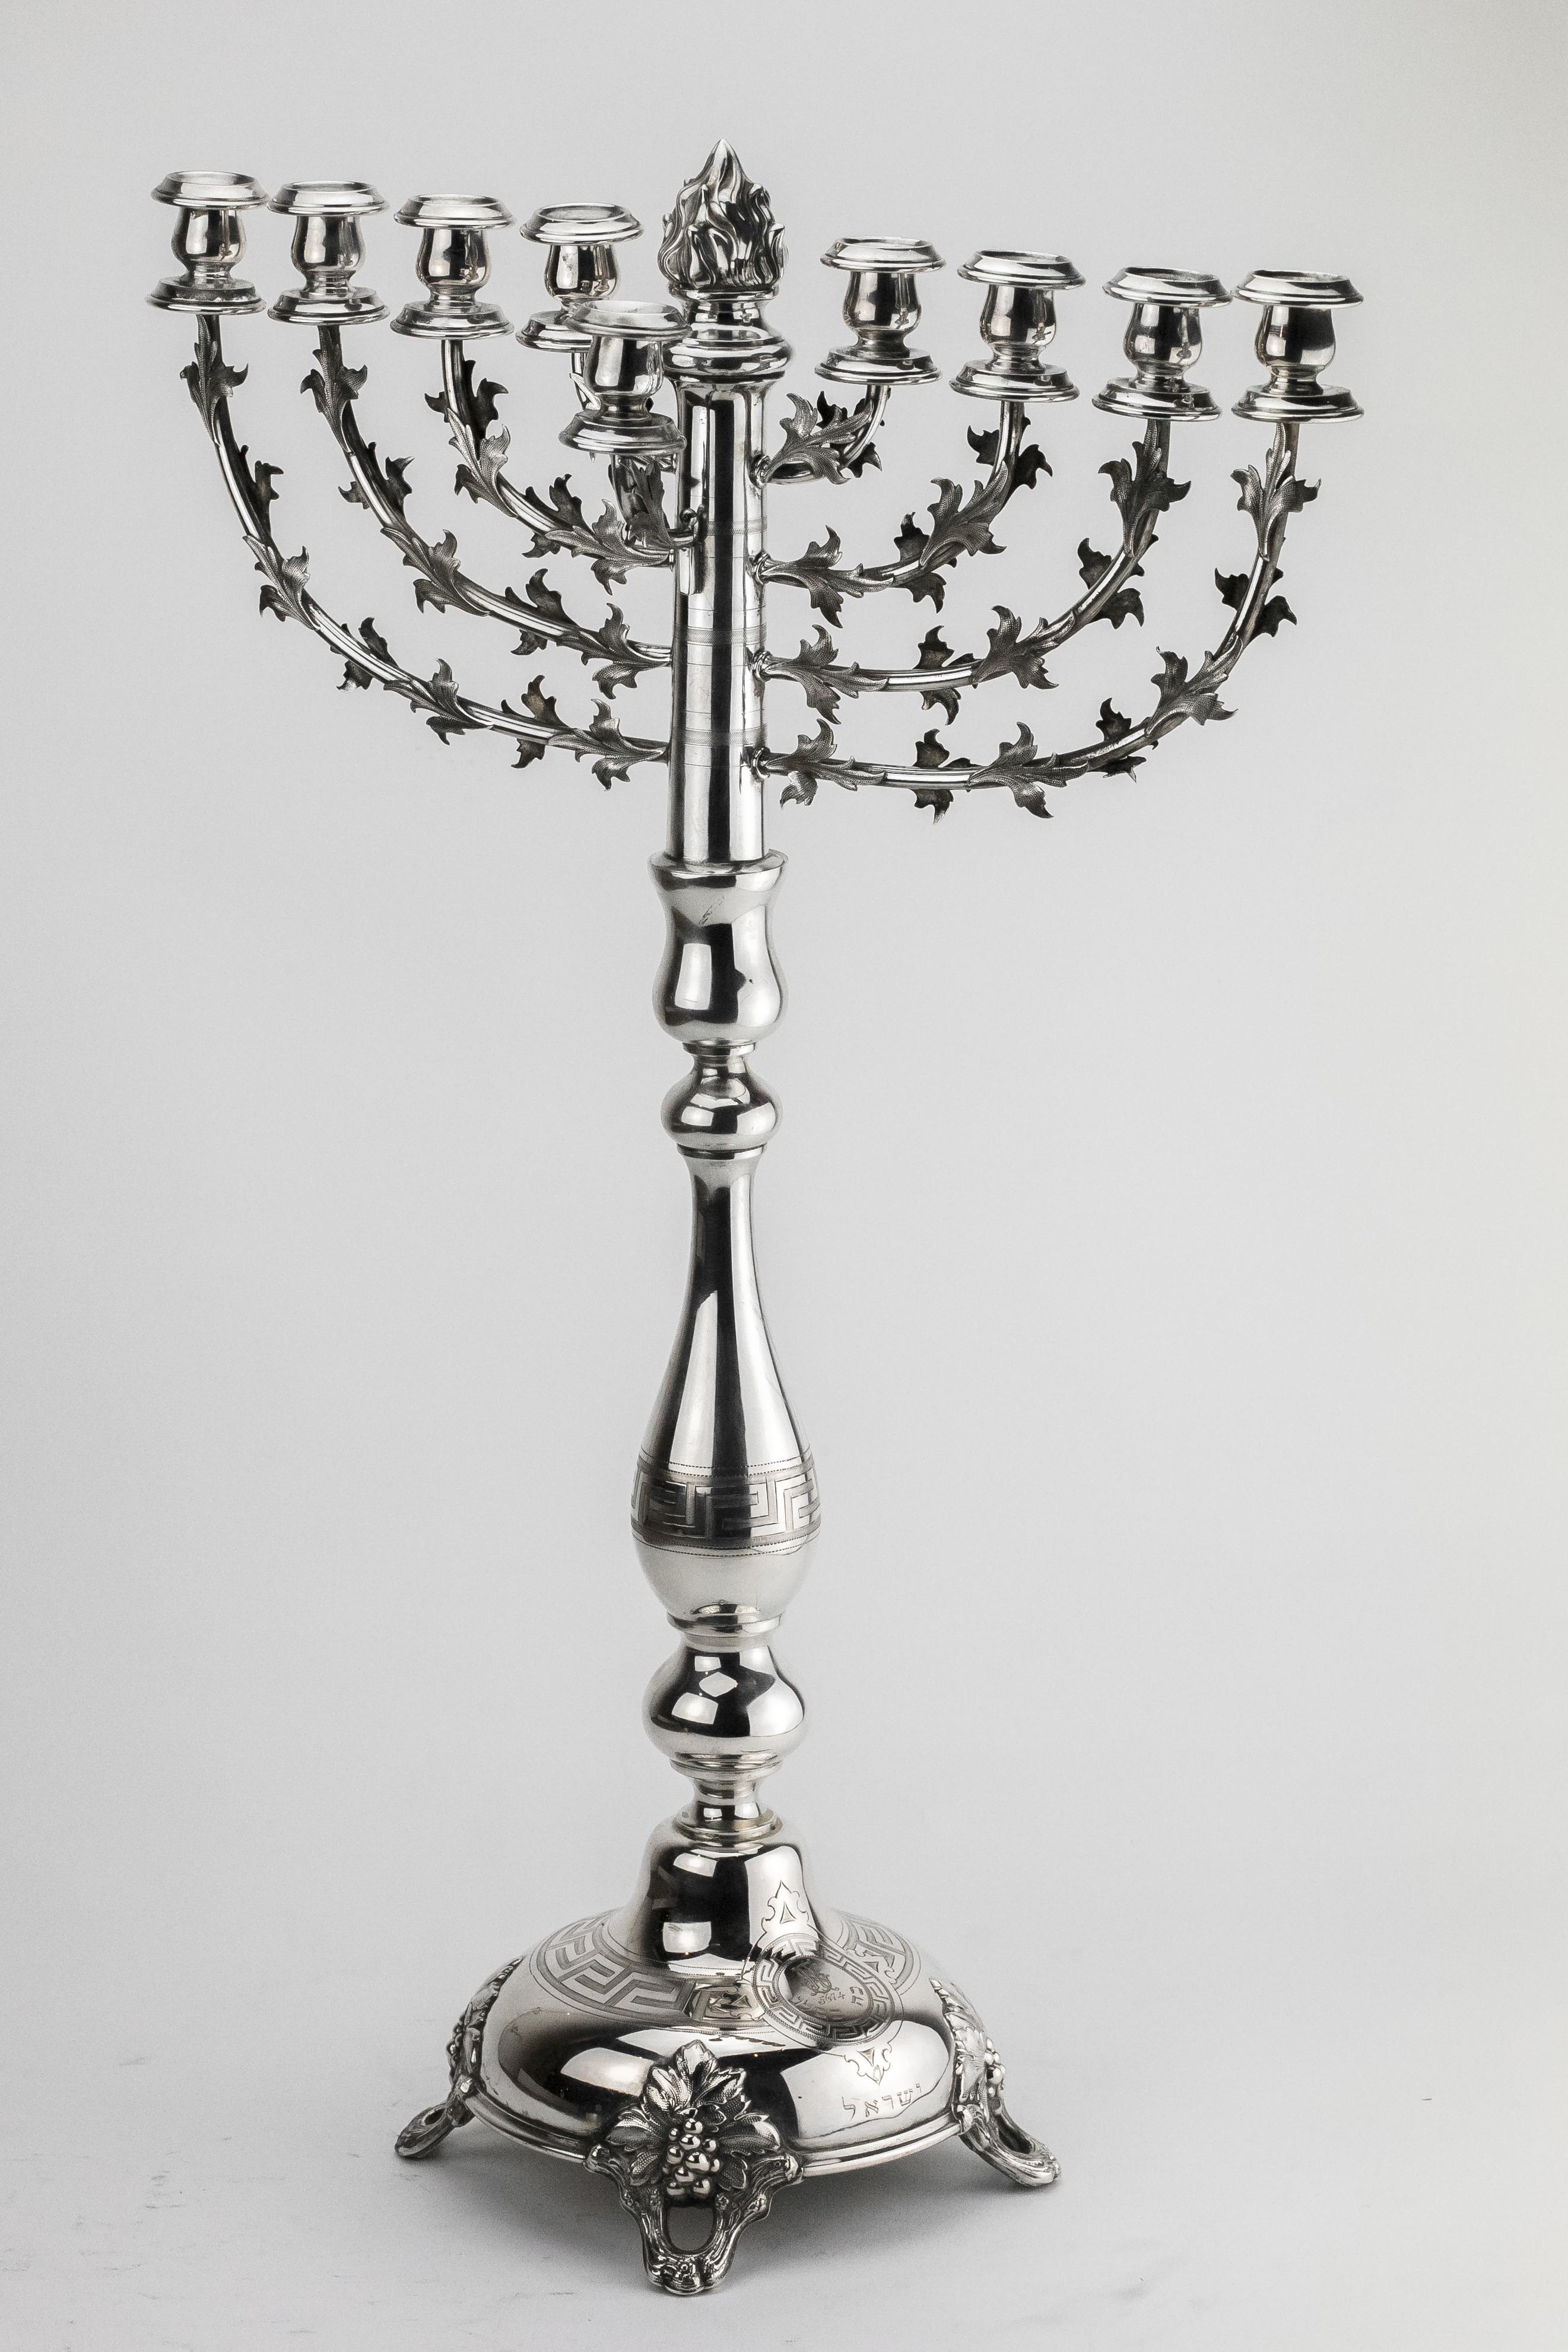 Large synagogue silver Hanukkah Lamp Menorah, Germany, 1914.
This large antique silver Menorah features a baluster form central column with geometrical design using the engraving technique, surmounted by a flame shaped finial, a removable Shamash